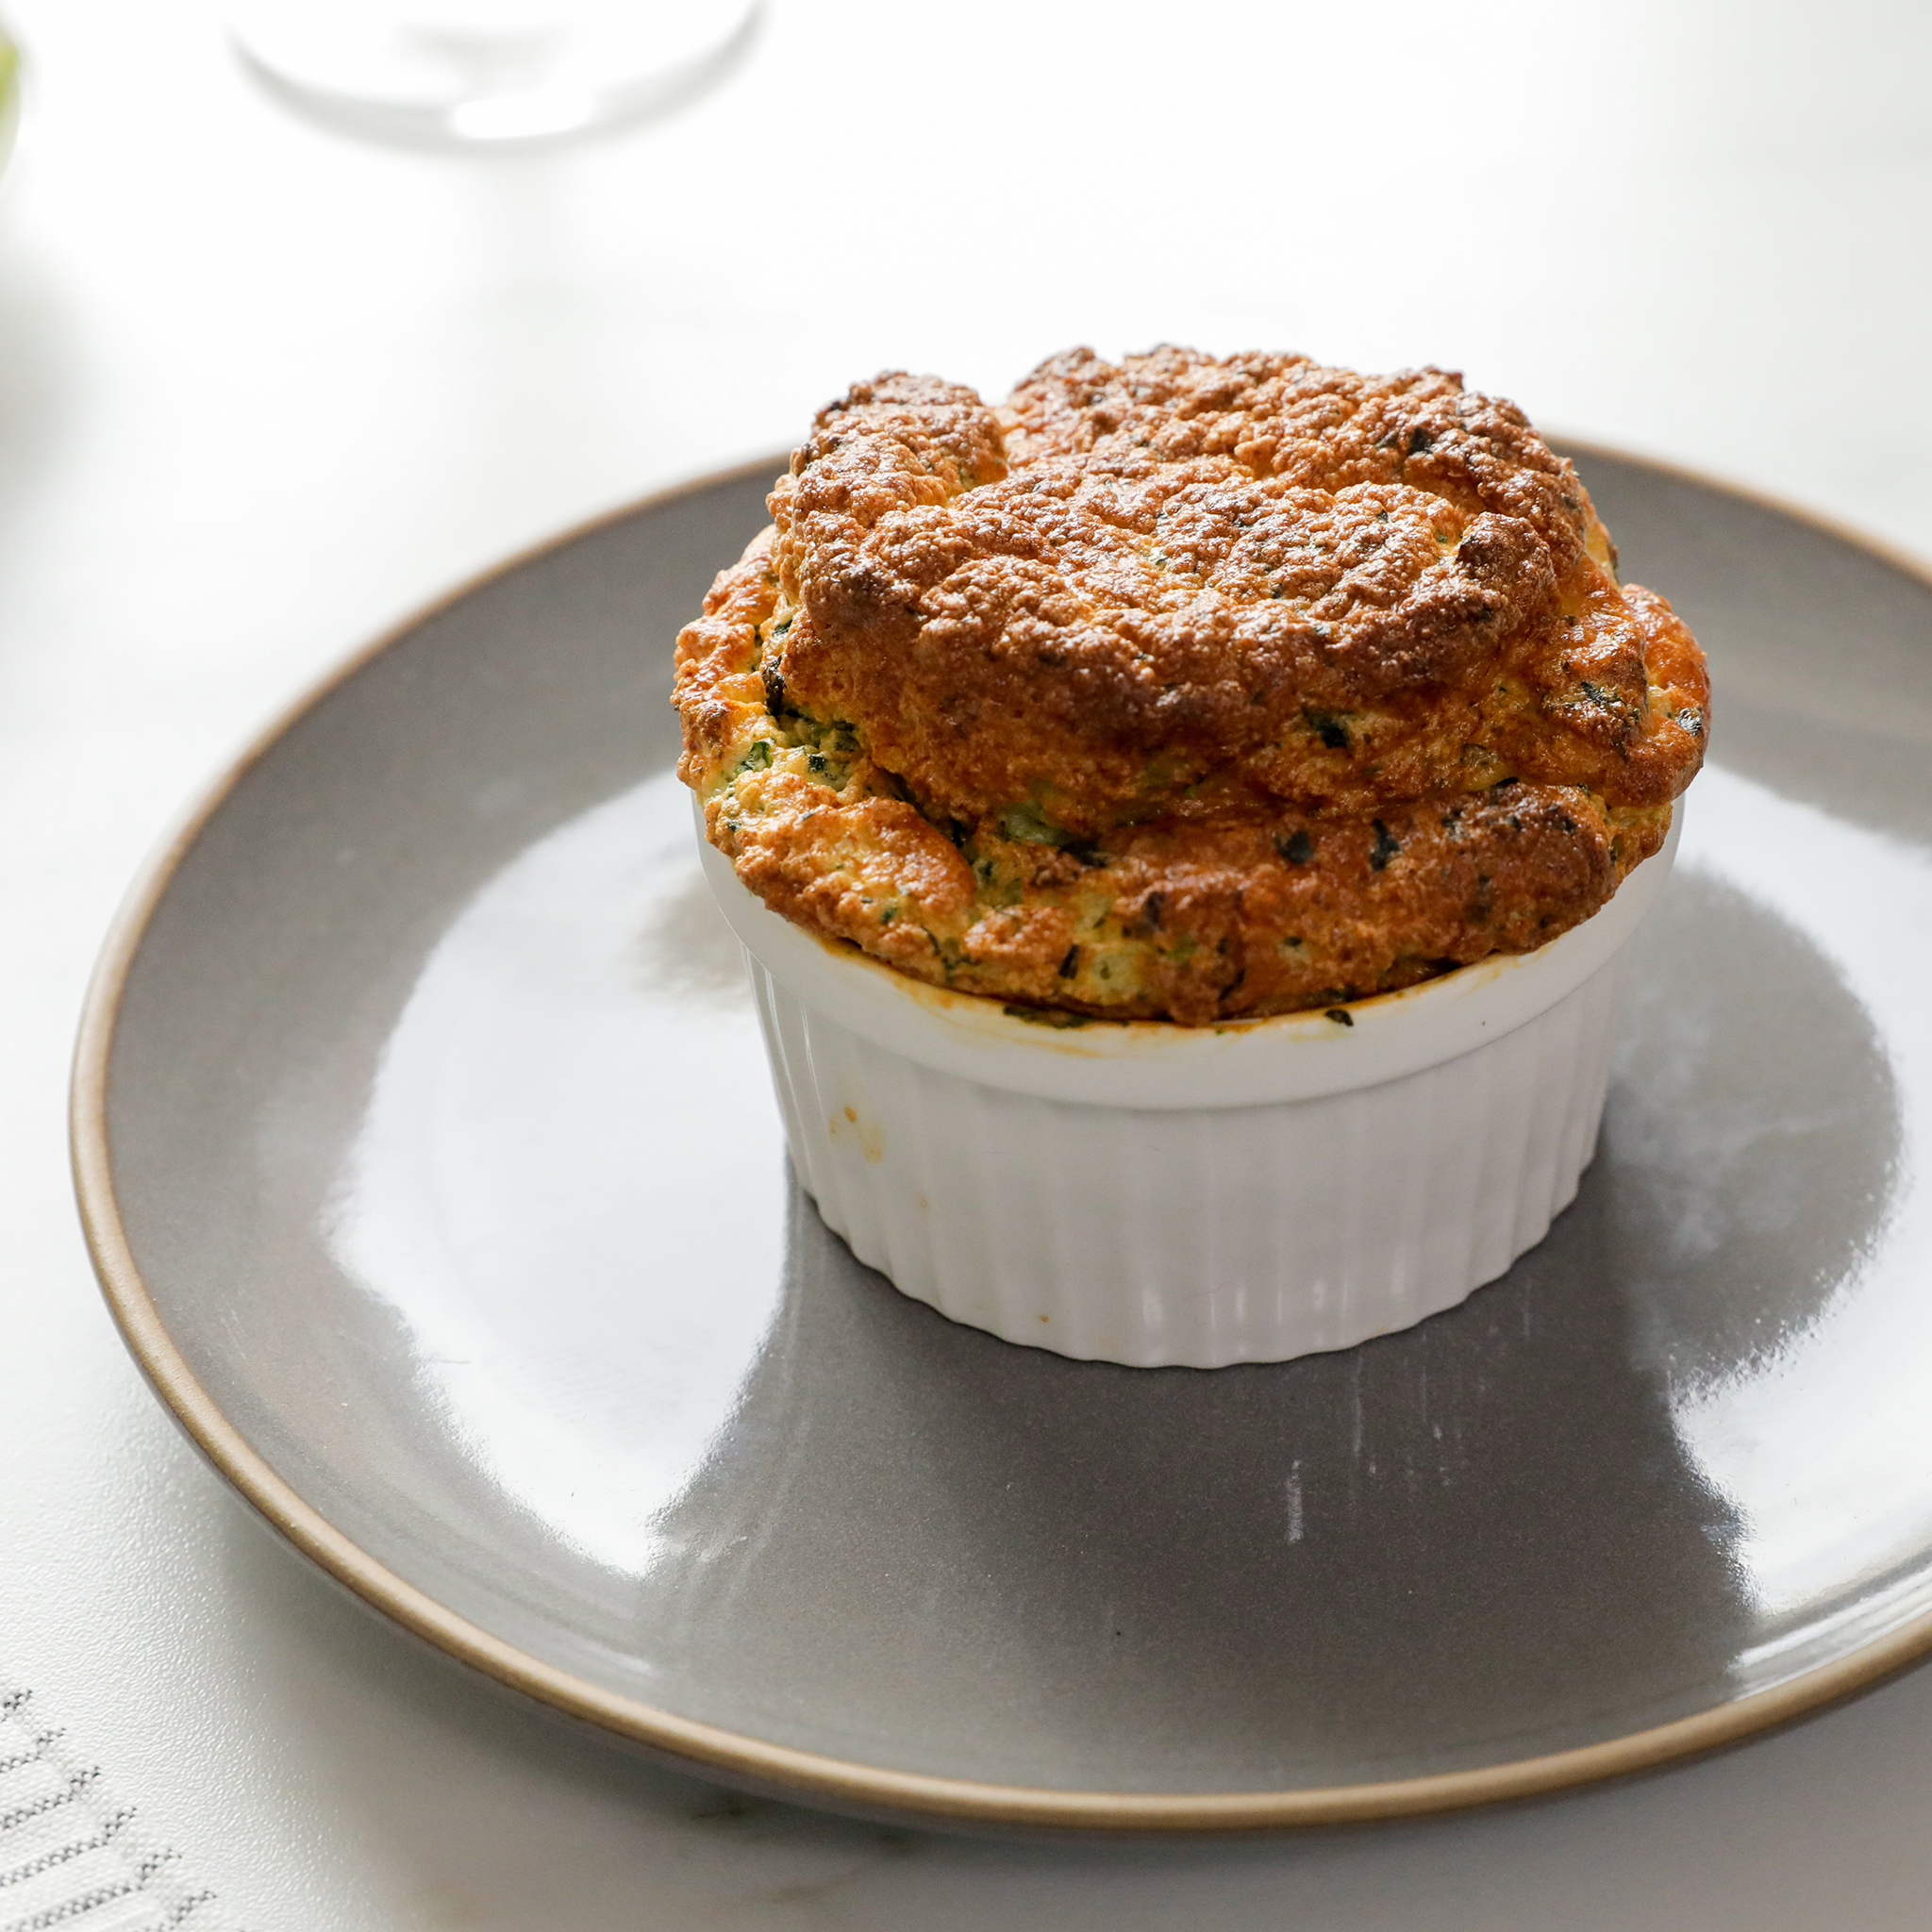 Zoe Francois' Cheese and Spinach Soufflés